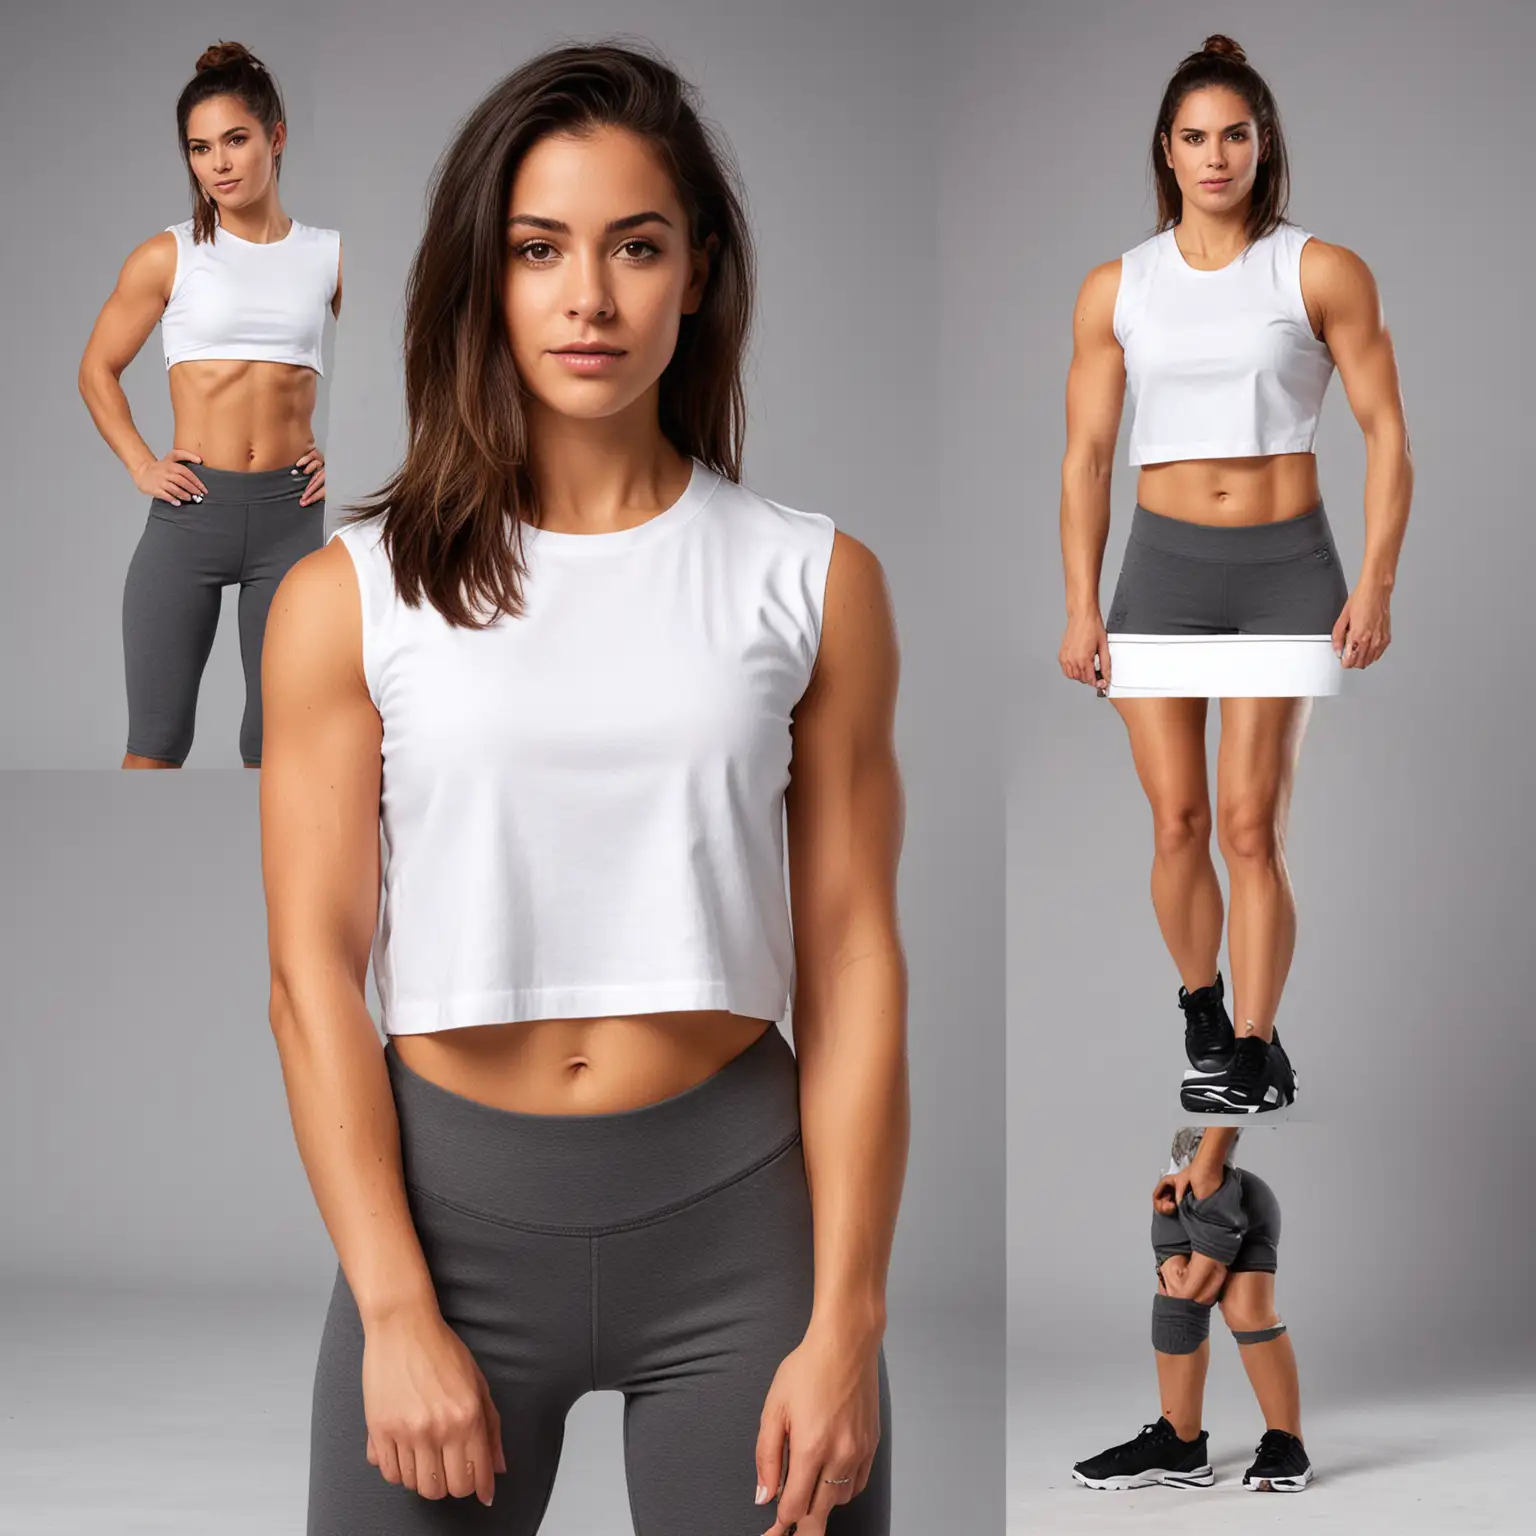 CrossFit Women in Loose Fit White Crop Cotton Sleeveless TShirts from Multiple Angles